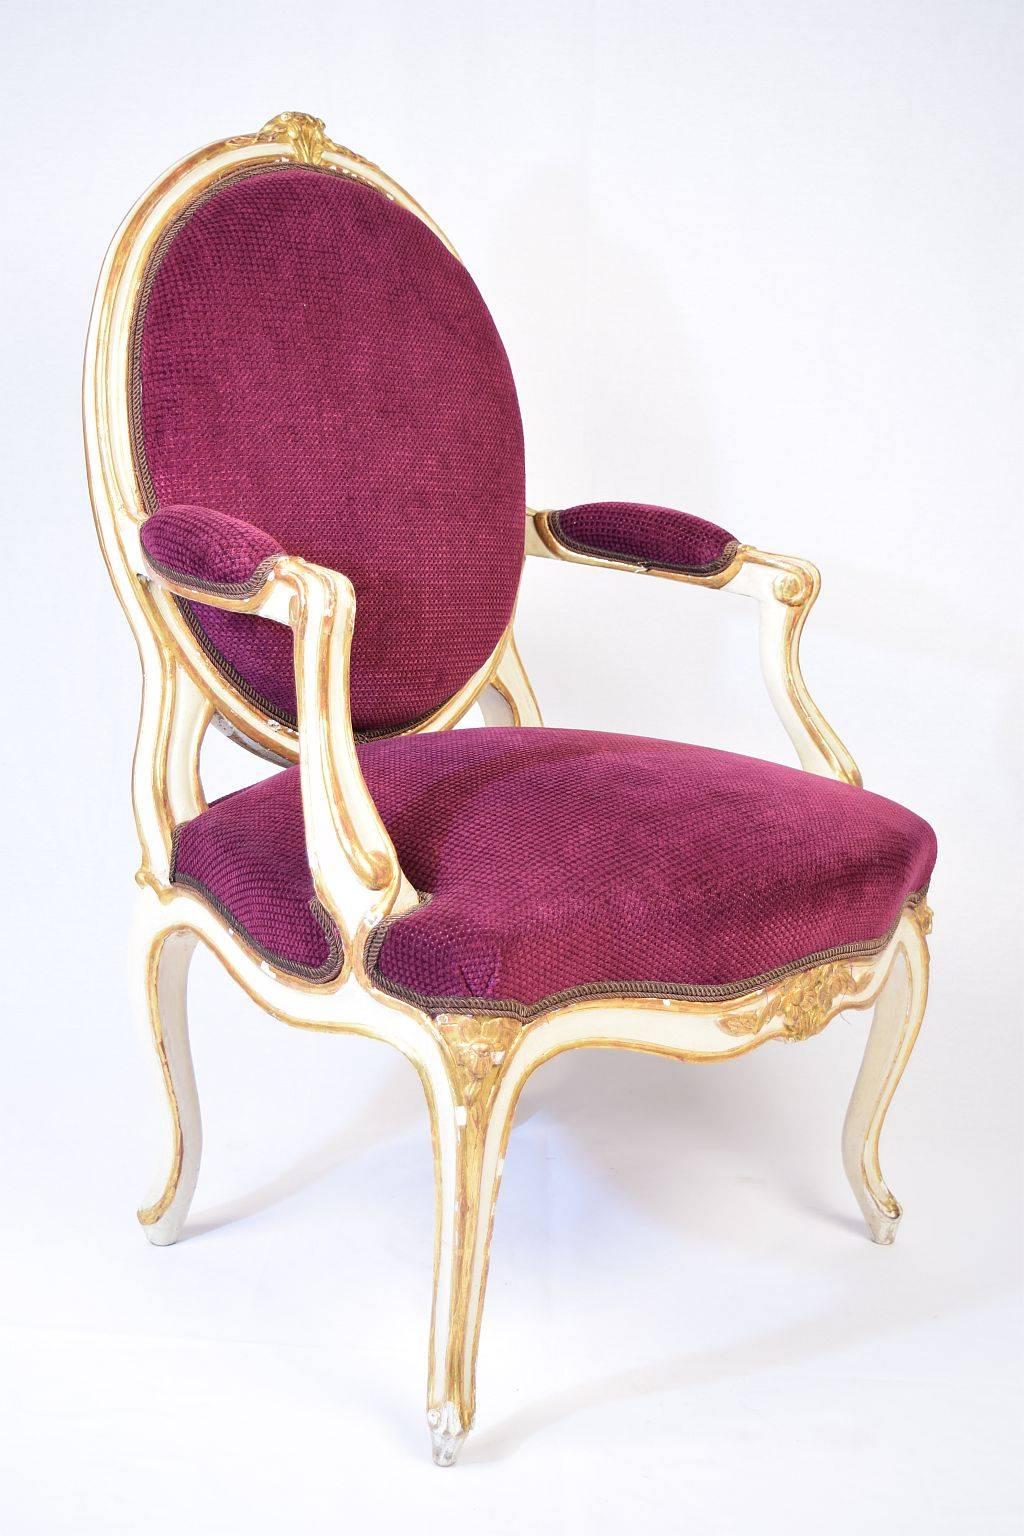 Set of six velvet upholstered pained and gilt wood Transition style armchairs with oval backs and bowed seats on cabriole legs. France, 18h Century. 

The Transition style, corresponds to the first part of the Louis XVI style in the French